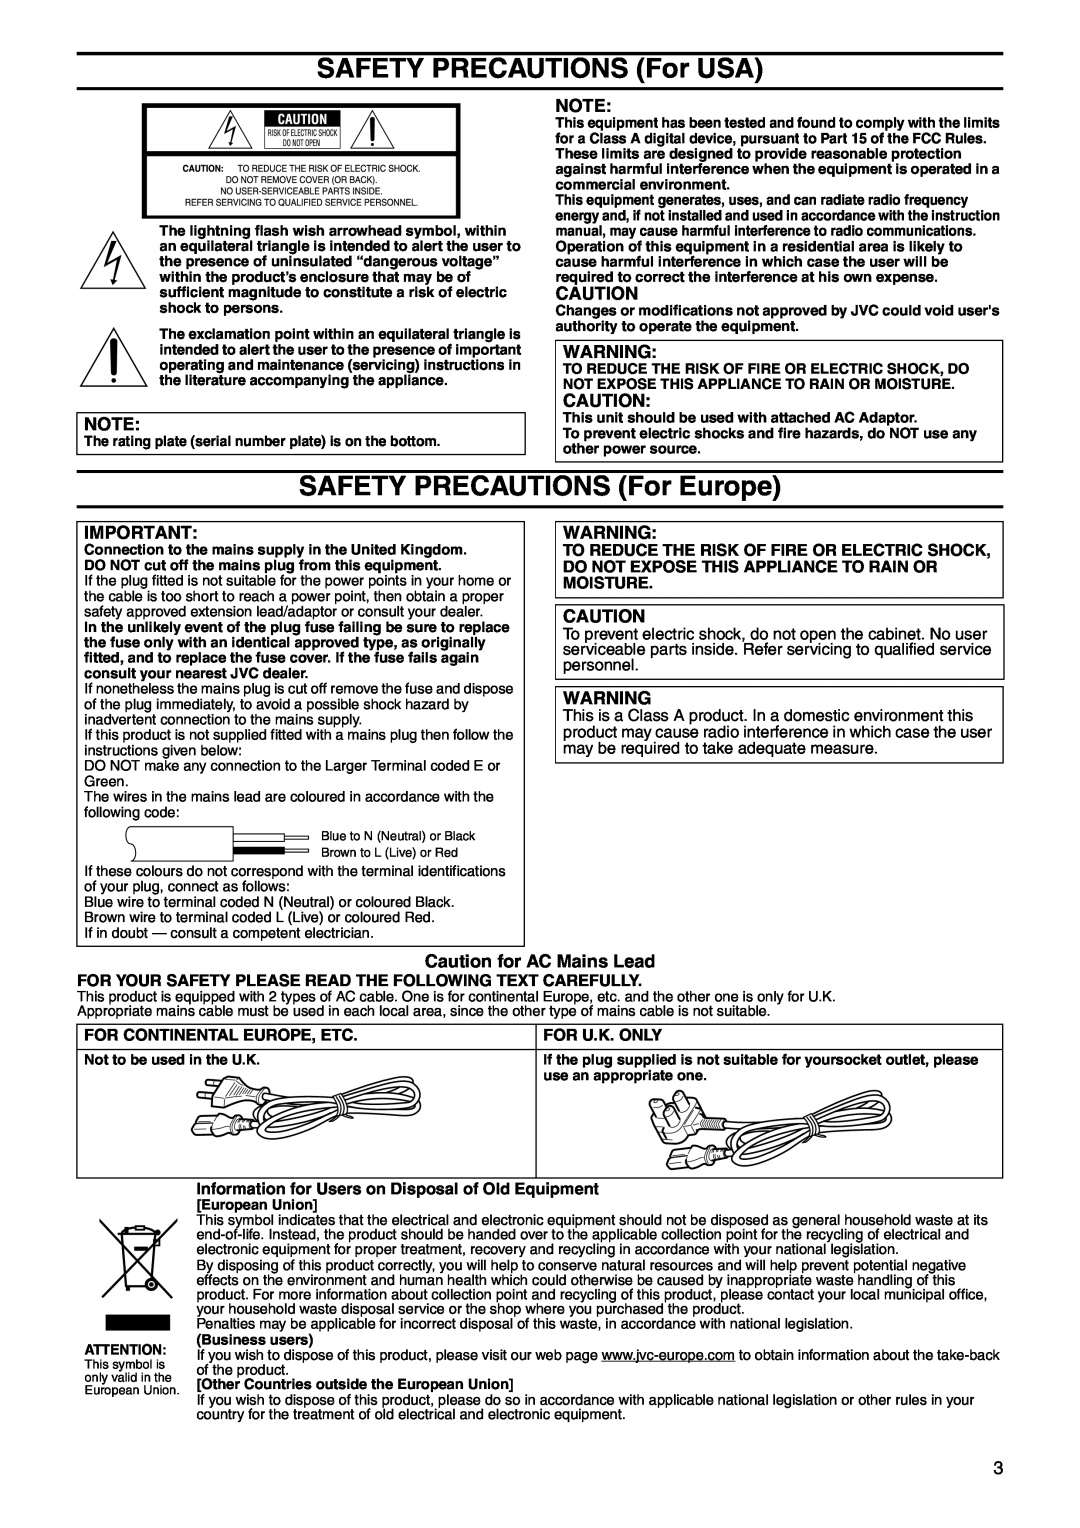 JVC VN-E4 manual SAFETY PRECAUTIONS For USA, SAFETY PRECAUTIONS For Europe, For Continental Europe, Etc, For U.K. Only 